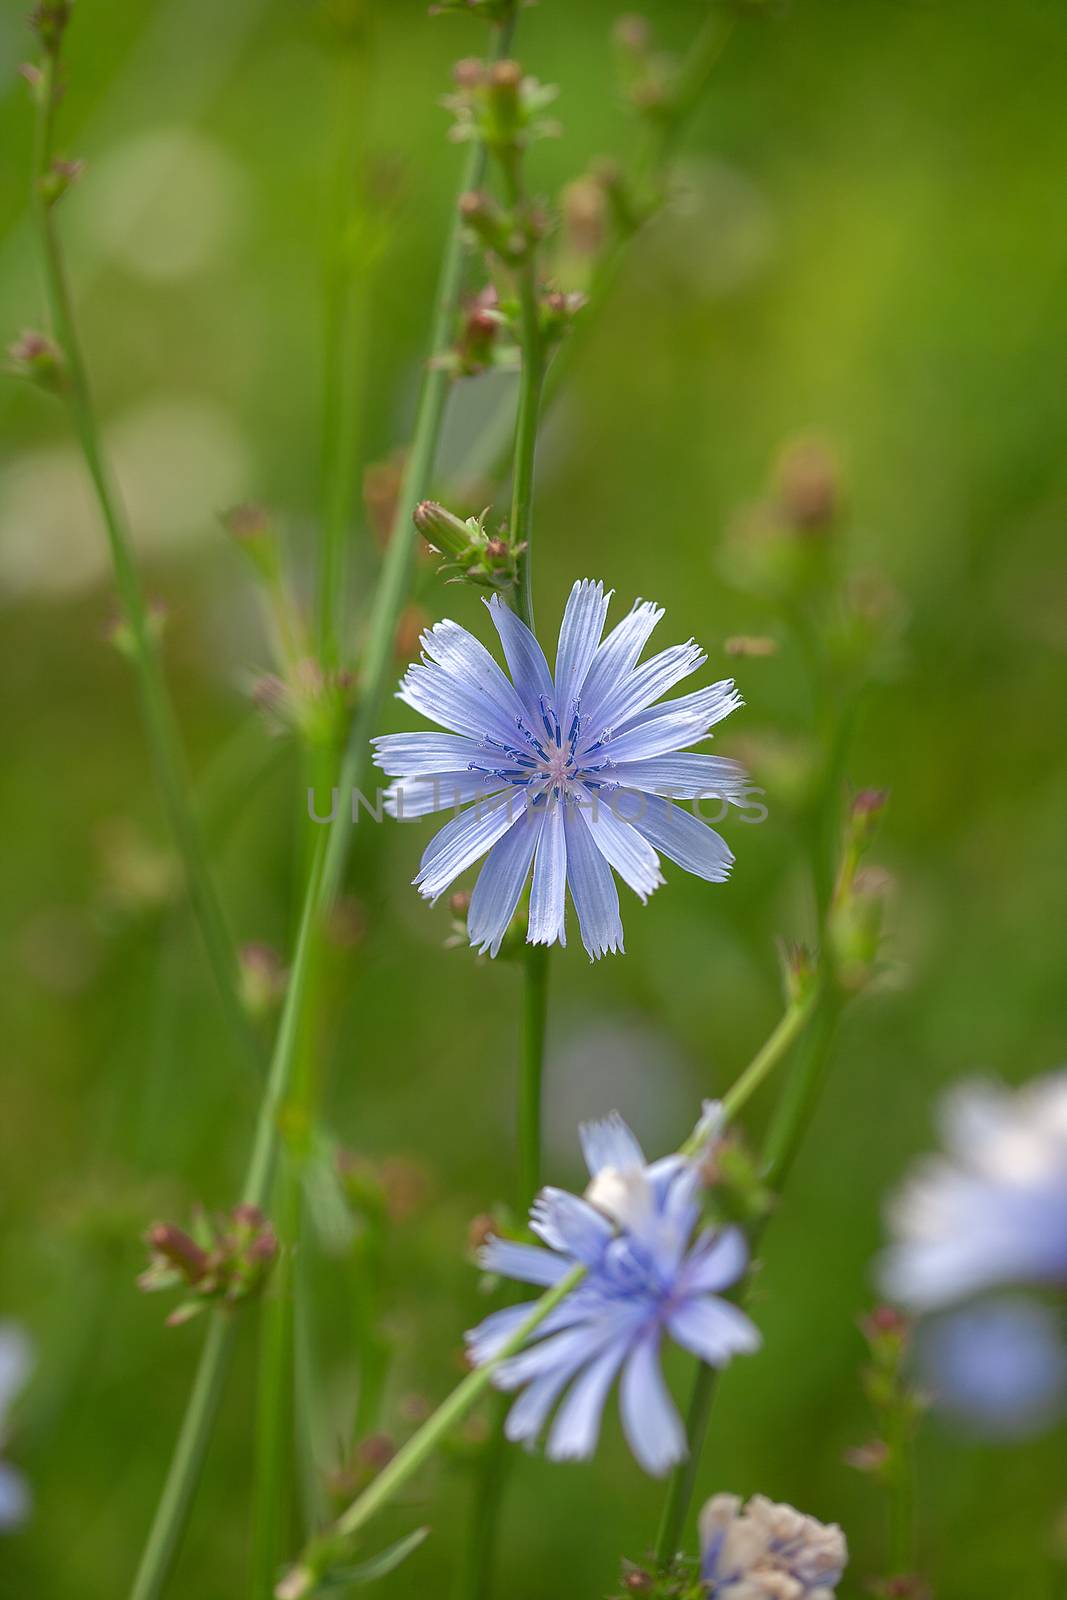 Chicory flowers on the meadow by Angorius